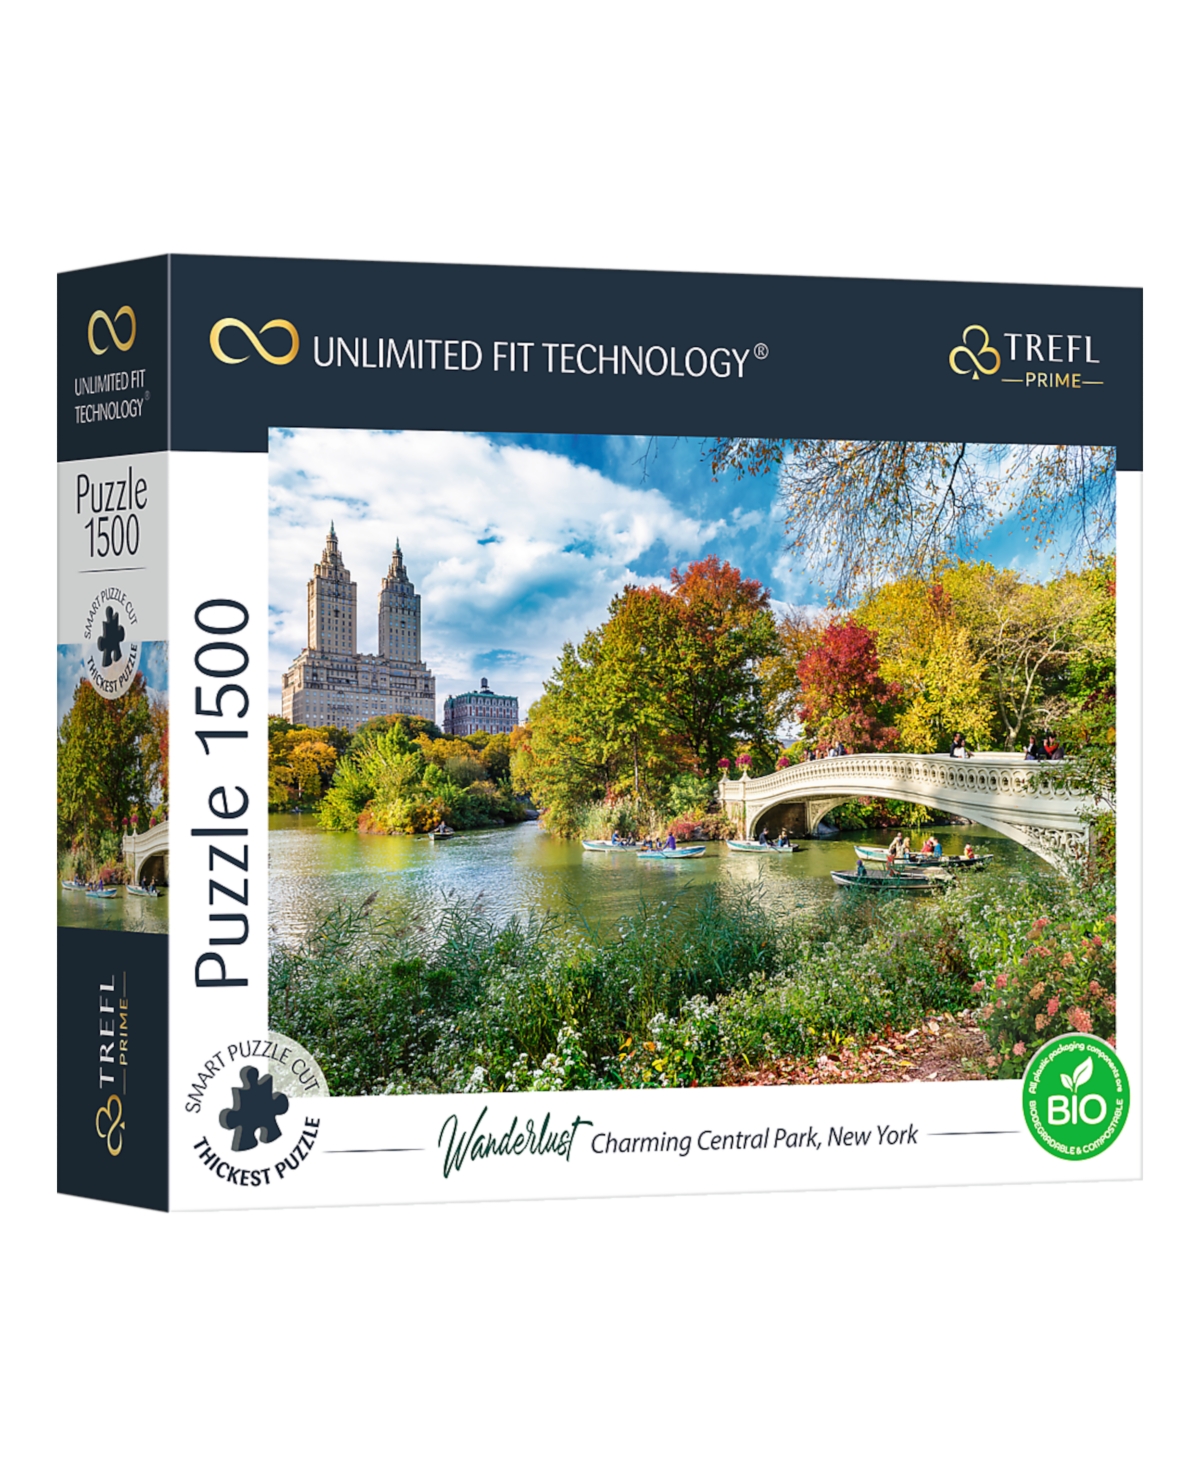 Trefl Prime 1500 Piece Puzzle- Wanderlust Charming Central Park, New York In Multi